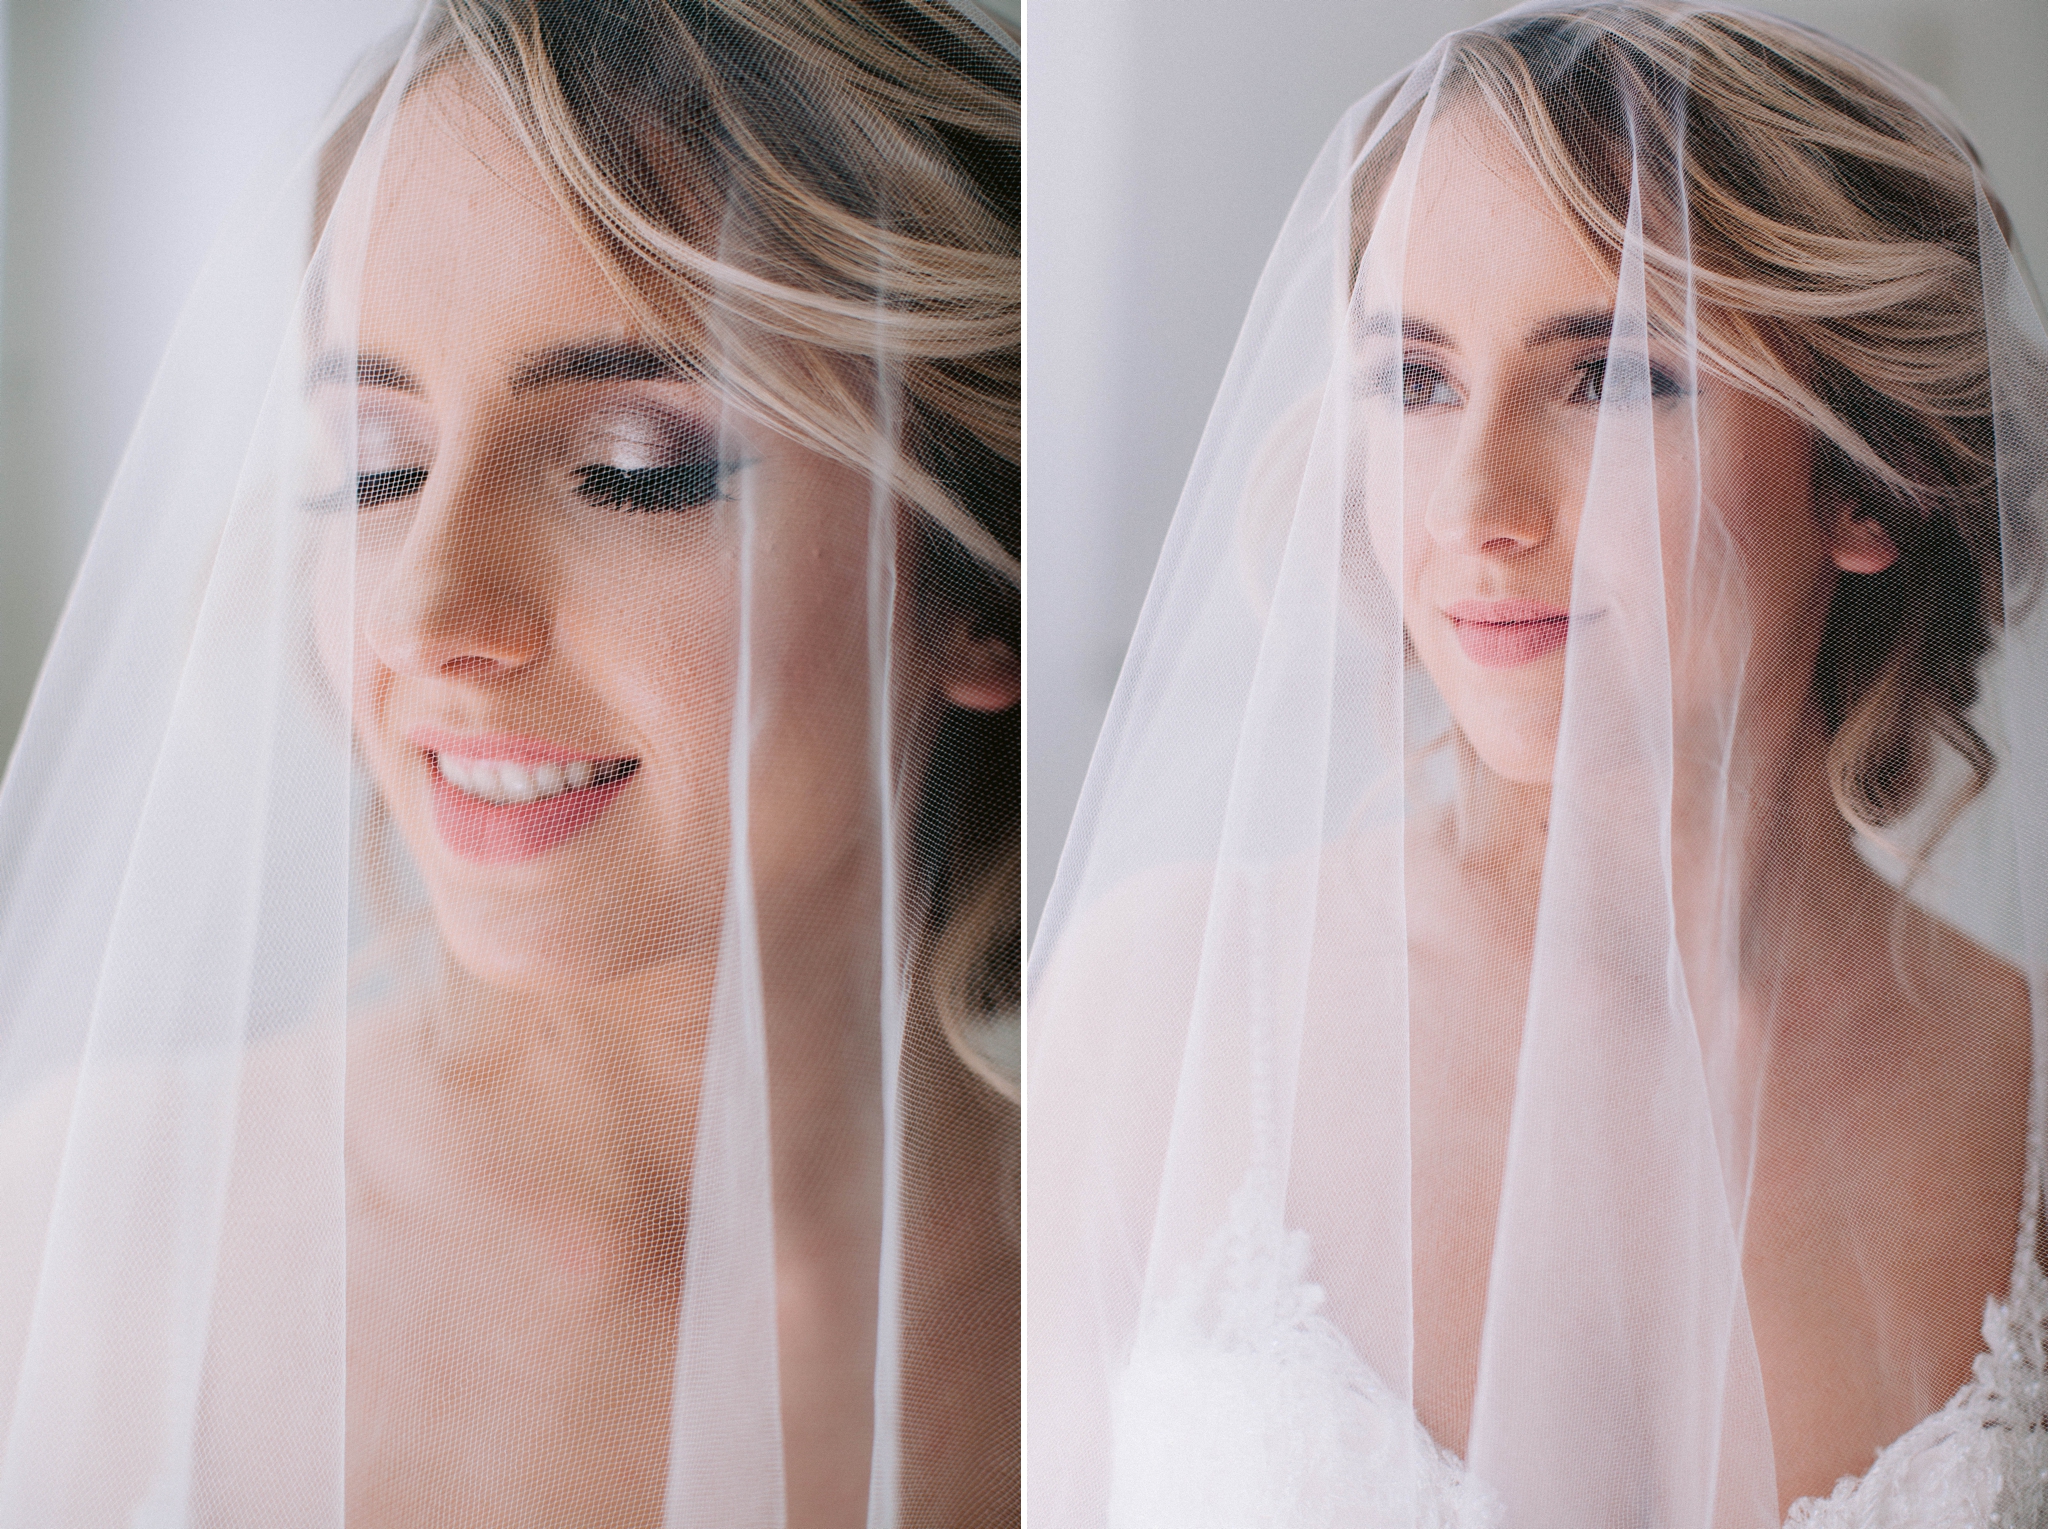  beauty shot - Indoor Natural Light Bridal Portraits by a window with a white backdrop - classic bride with soft drop veil over her face - wedding gown by Stella York - Honolulu, Oahu, Hawaii Wedding Photographer 